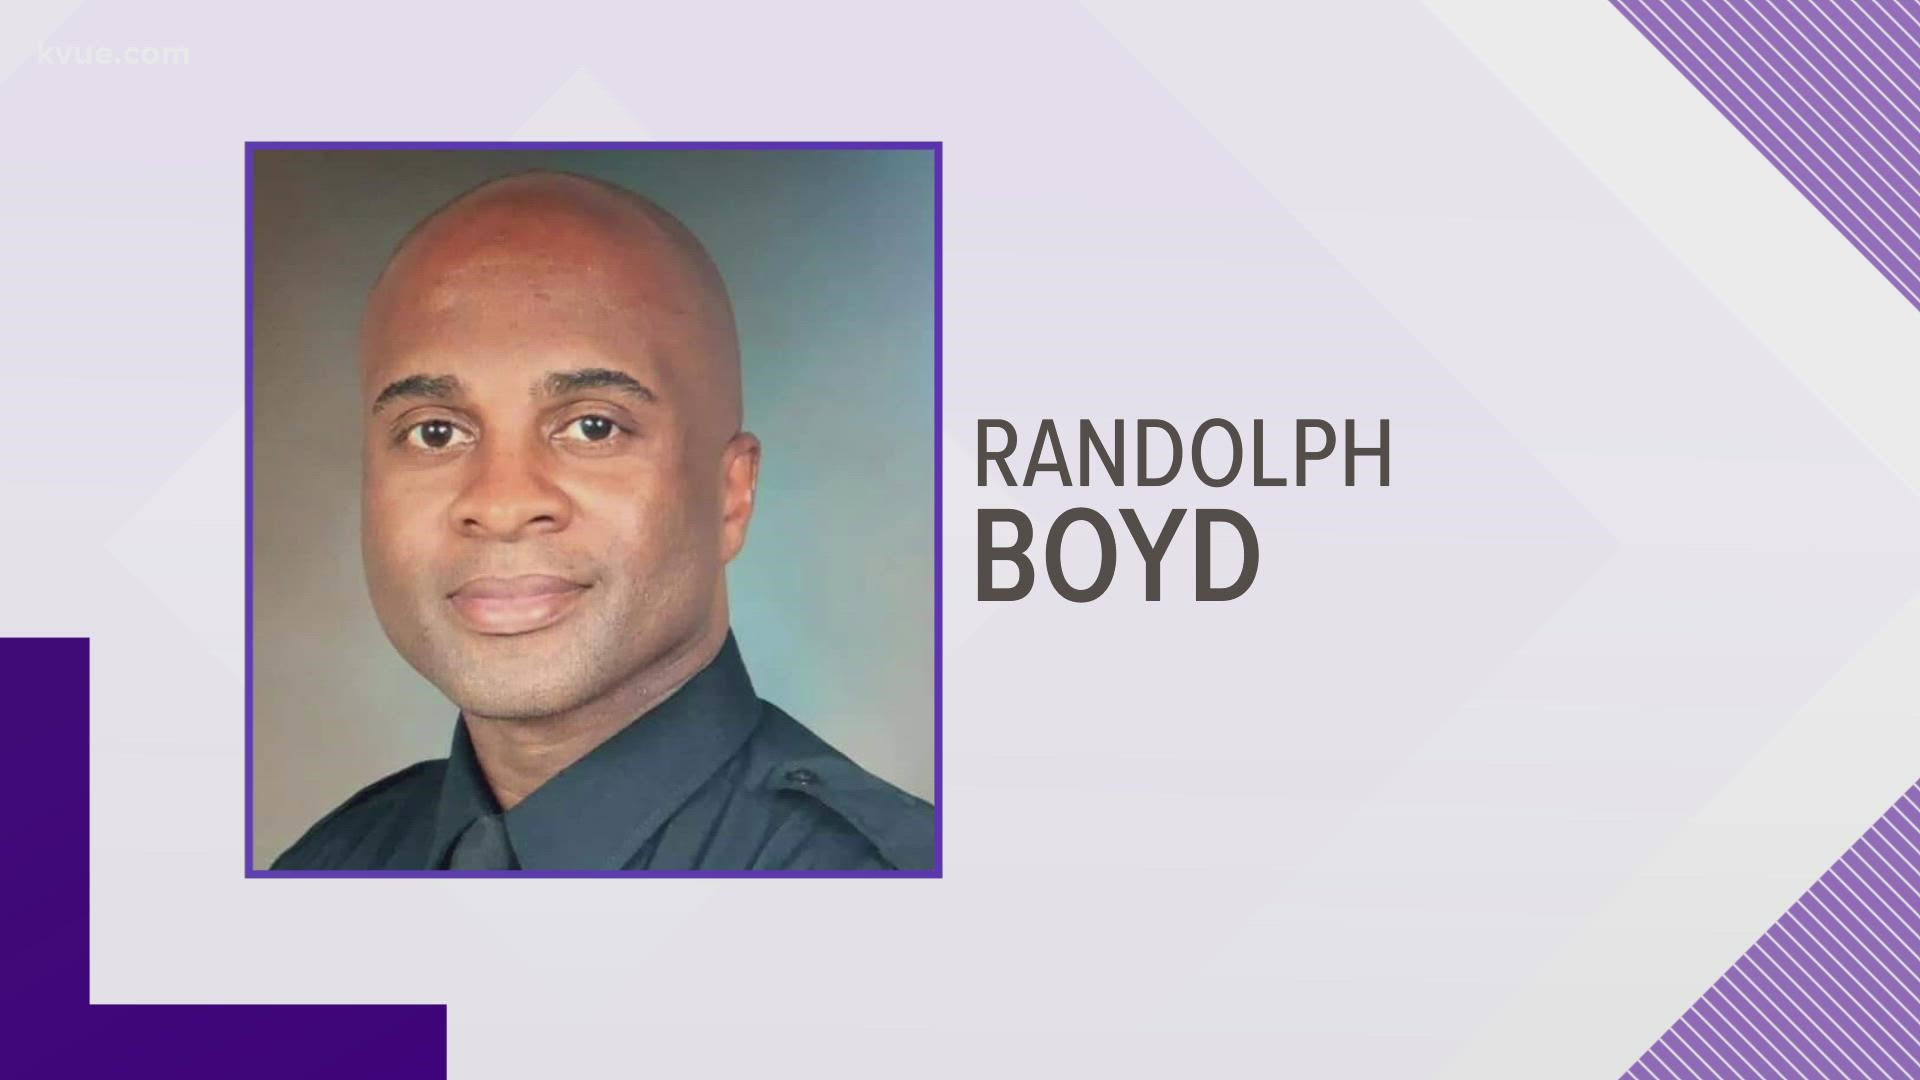 Interim Police Chief Joe Chacon notified officers that Senior Patrol Officer Randolph Boyd, who joined the force in 2014, died early Wednesday.